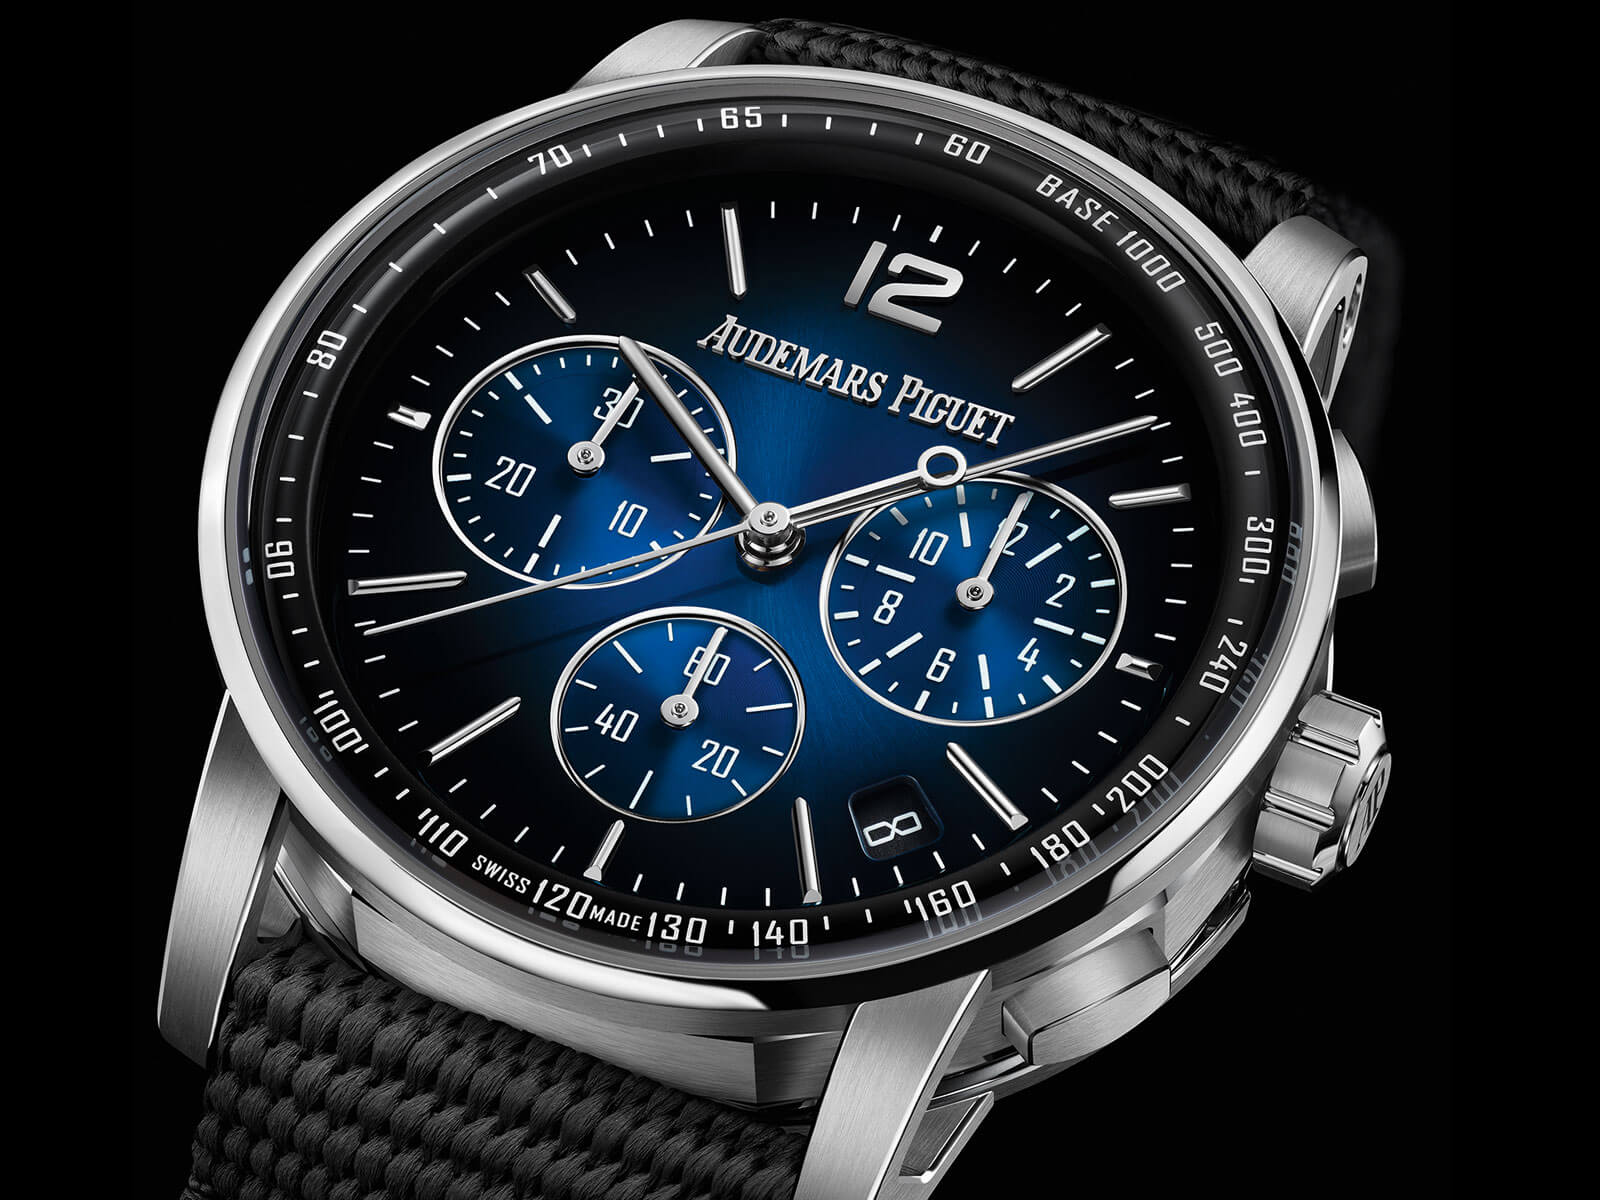 Code 11.59 by Audemars Piguet 26393BC.OO.A002KB.01 Chronograph with a Column-wheel and Flyback Function